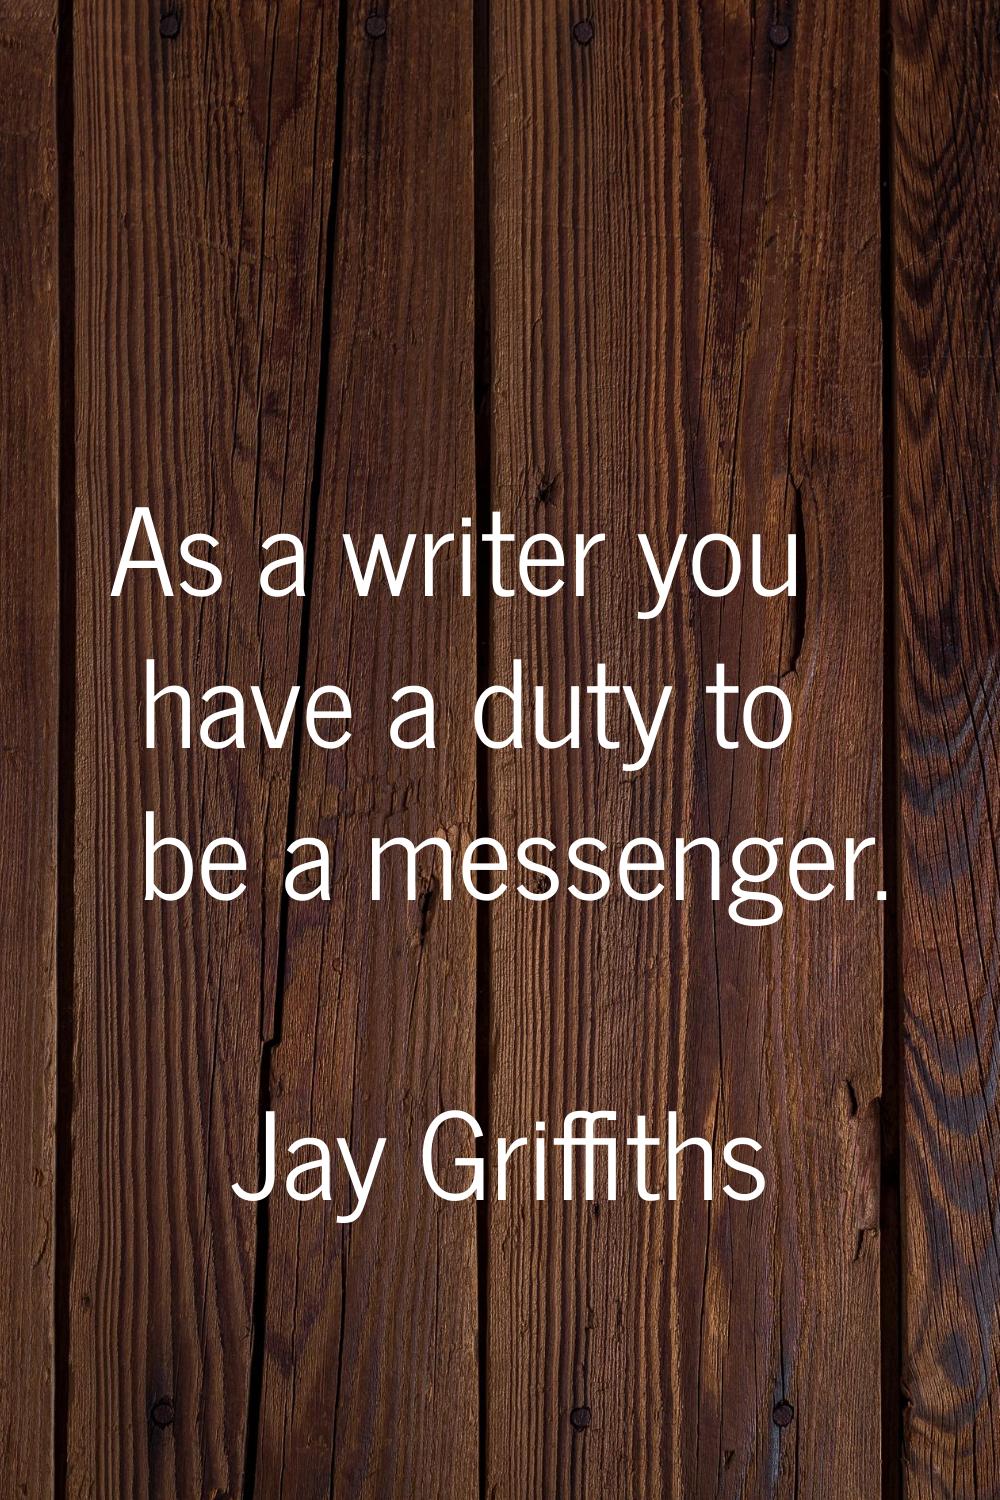 As a writer you have a duty to be a messenger.